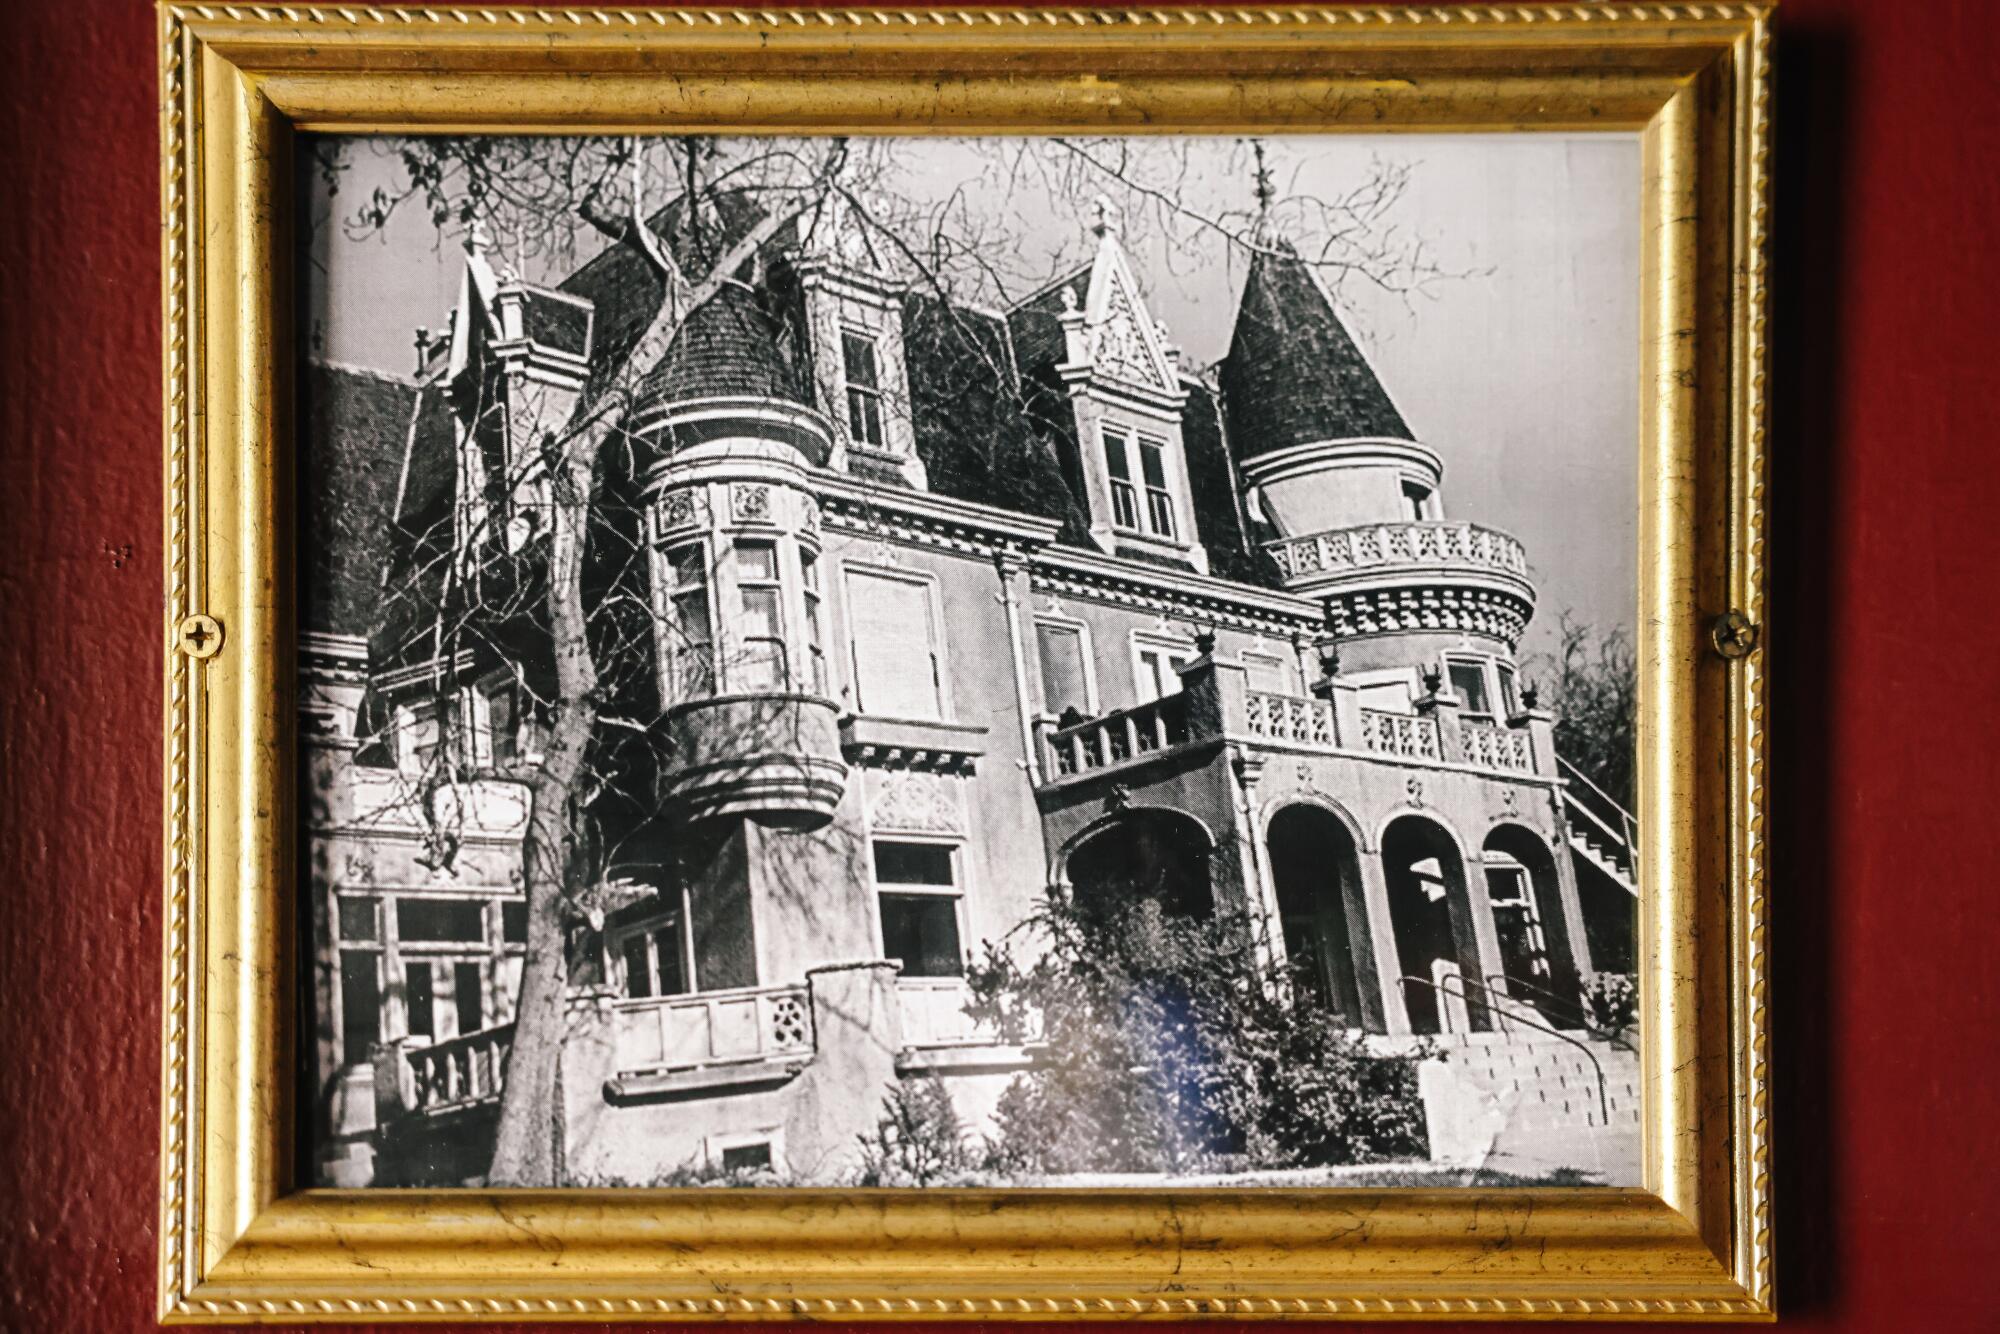 An old black-and-white photo of an ornate mansion, in a gold frame hanging on a red wall.